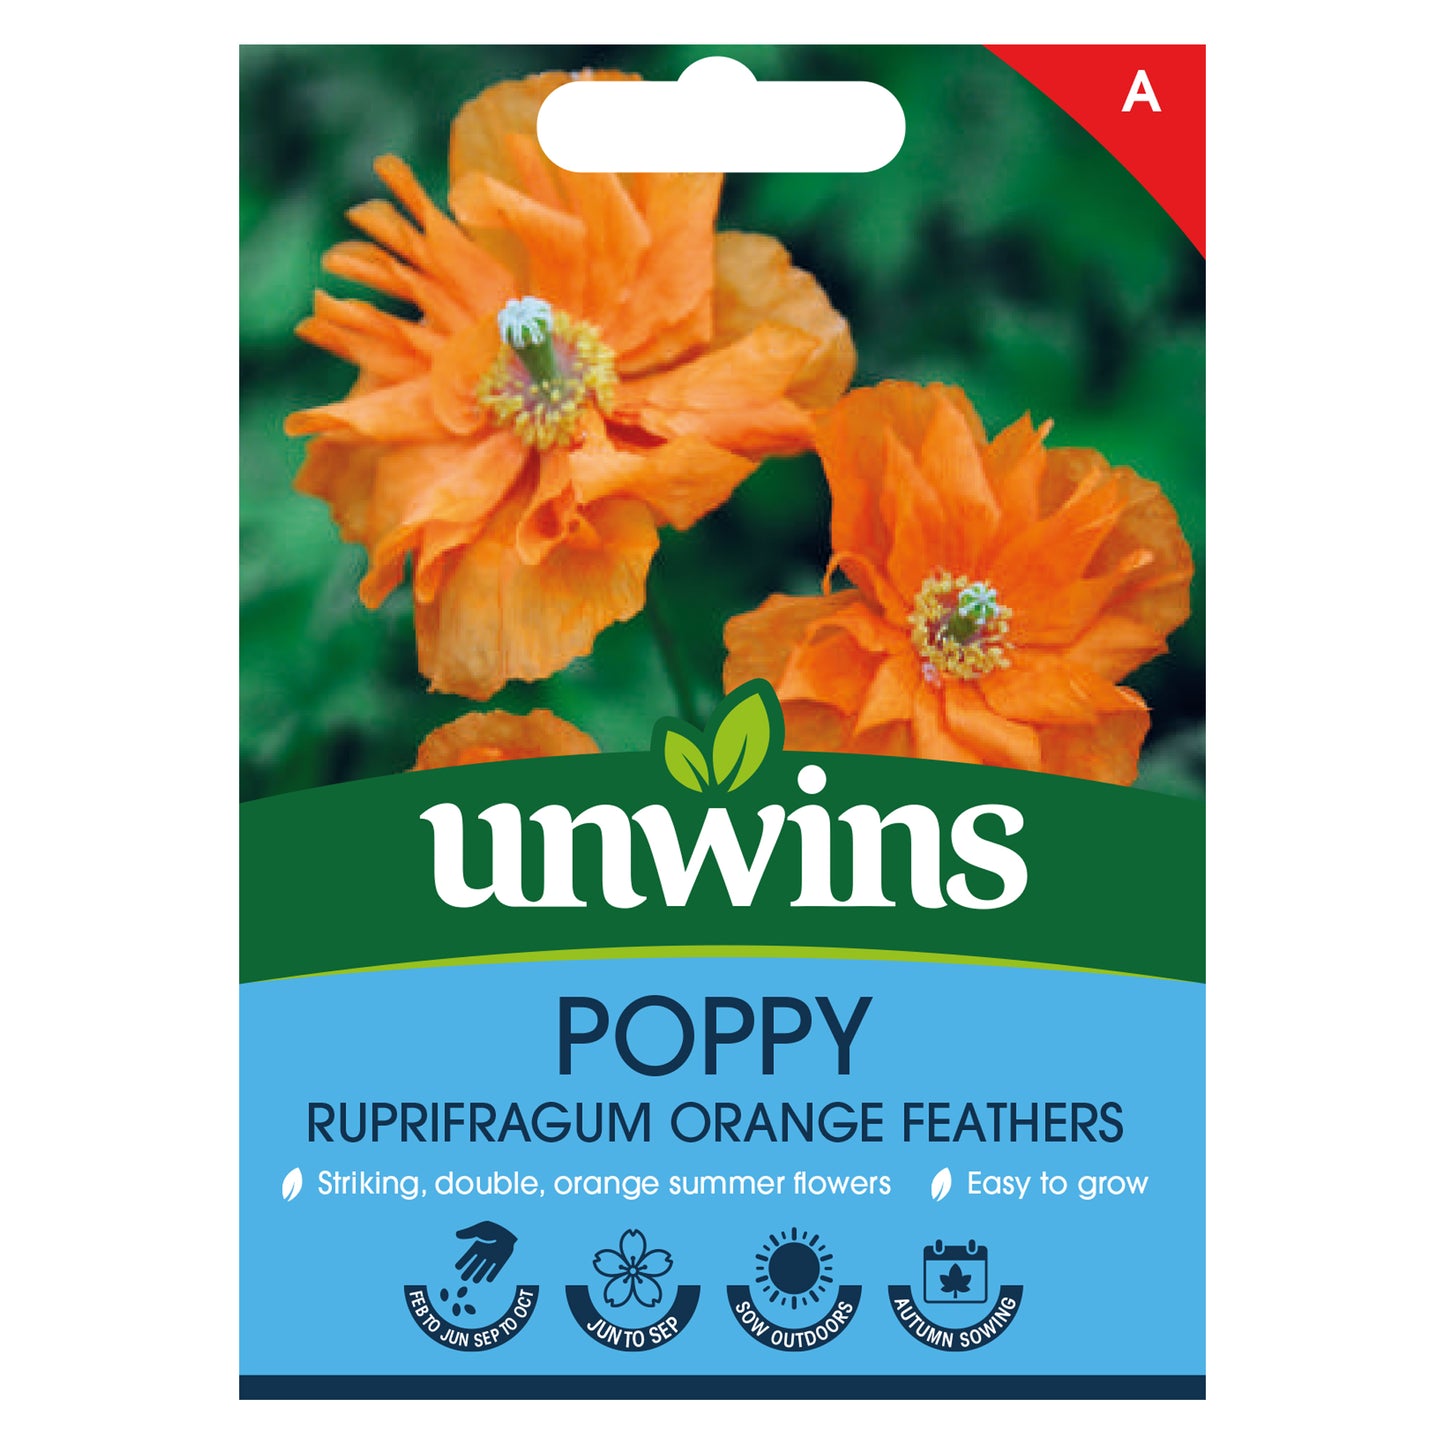 Unwins Poppy Rupifragum Orange Feathers Seeds front of pack